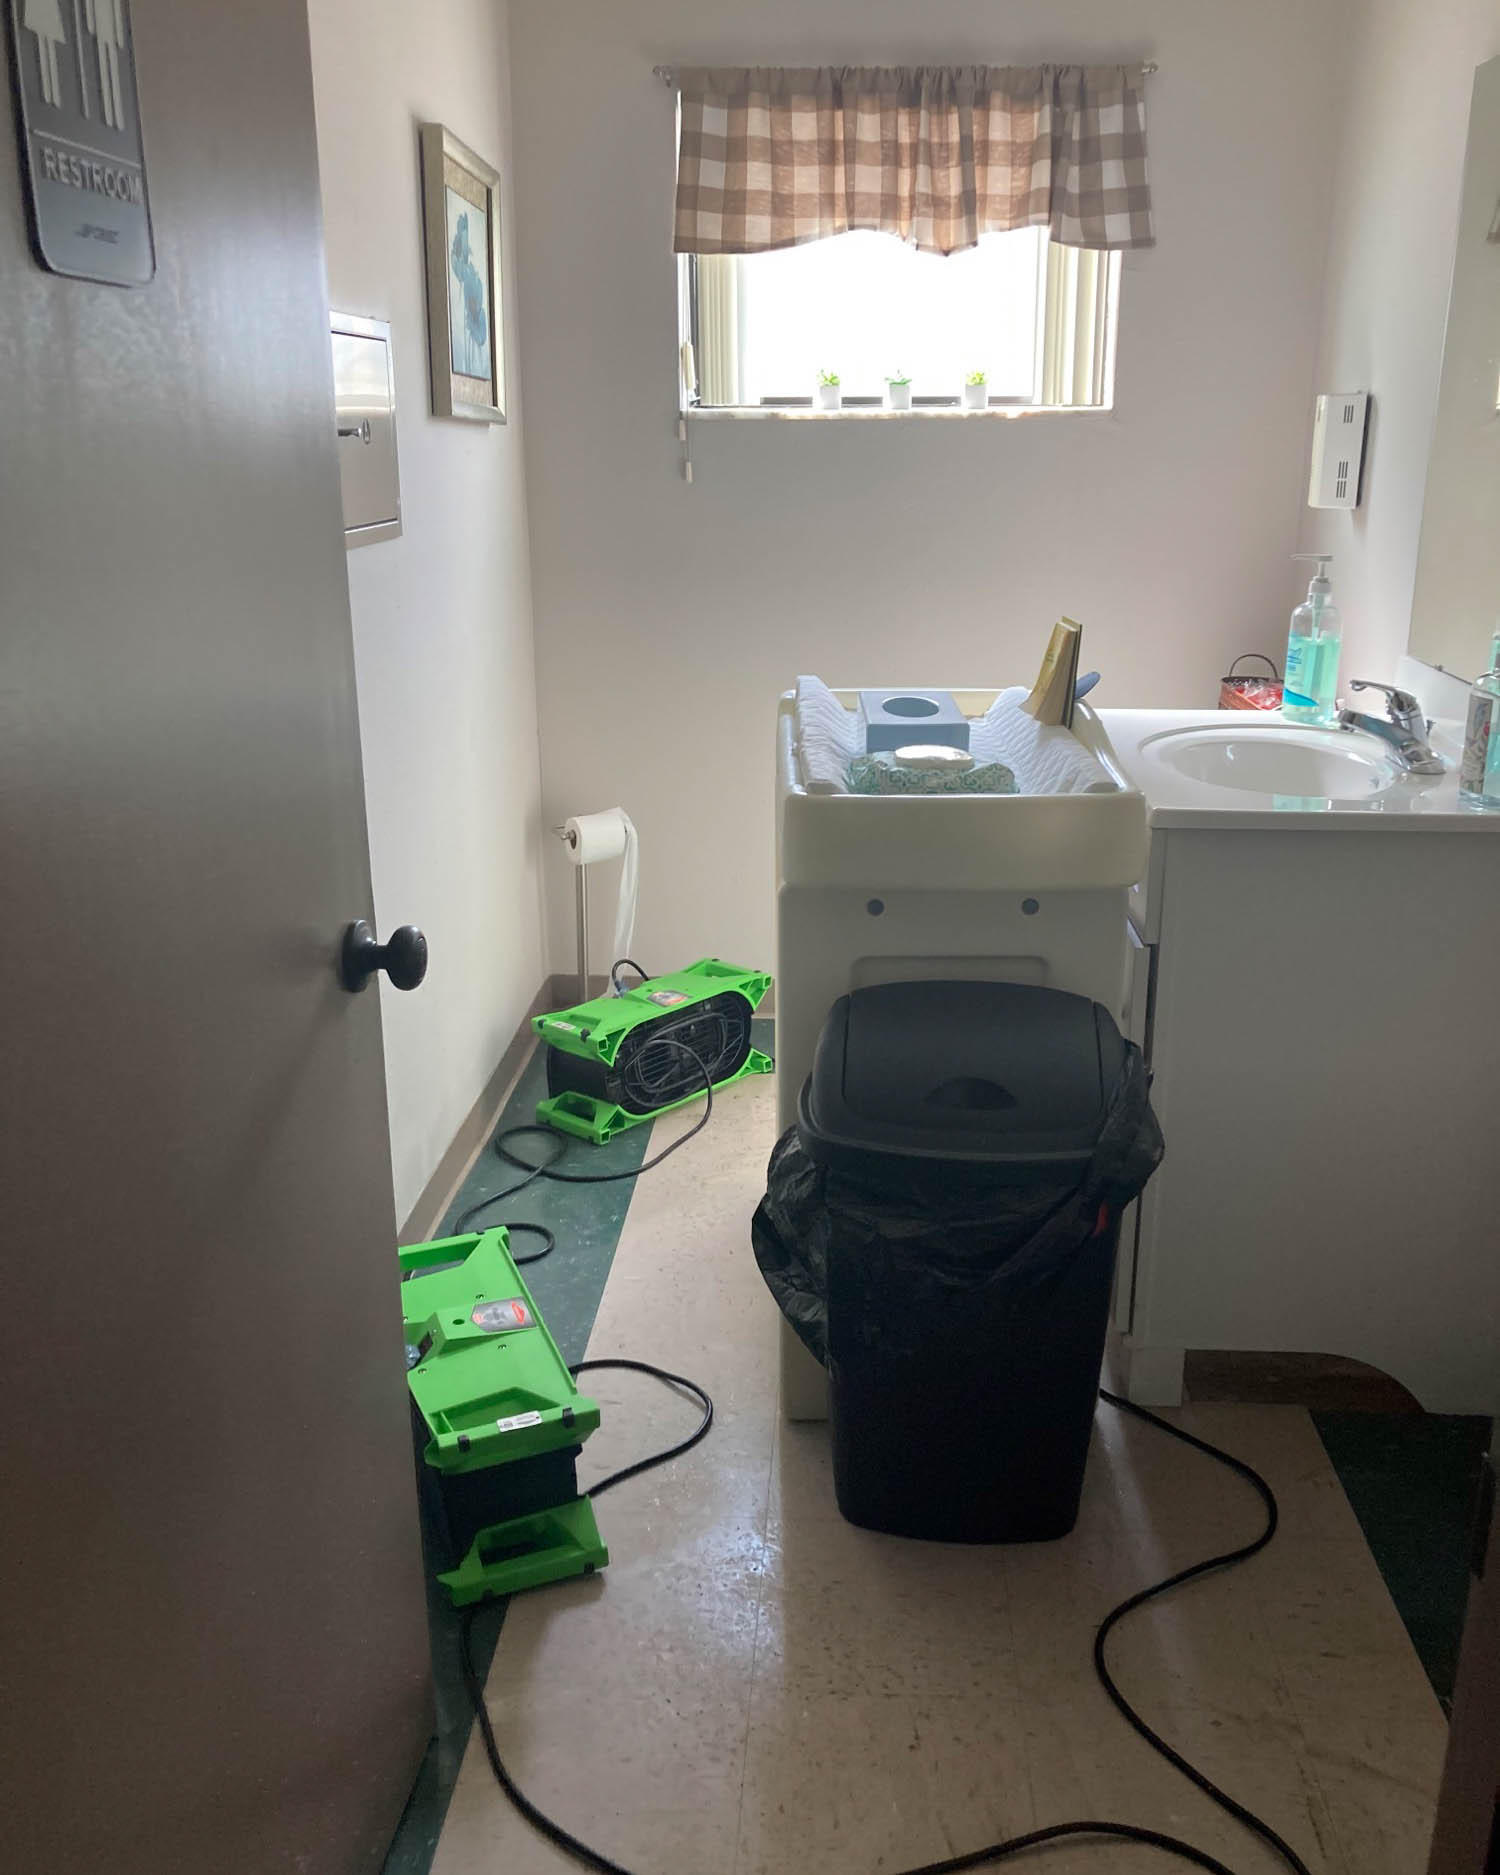 SERVPRO of Cape Coral South has a team of trained restoration technicians who know the exact steps to take after you've experienced water damage in your North Fort Myers, FL, business. Our team is available 24/7 to help with the whole process.